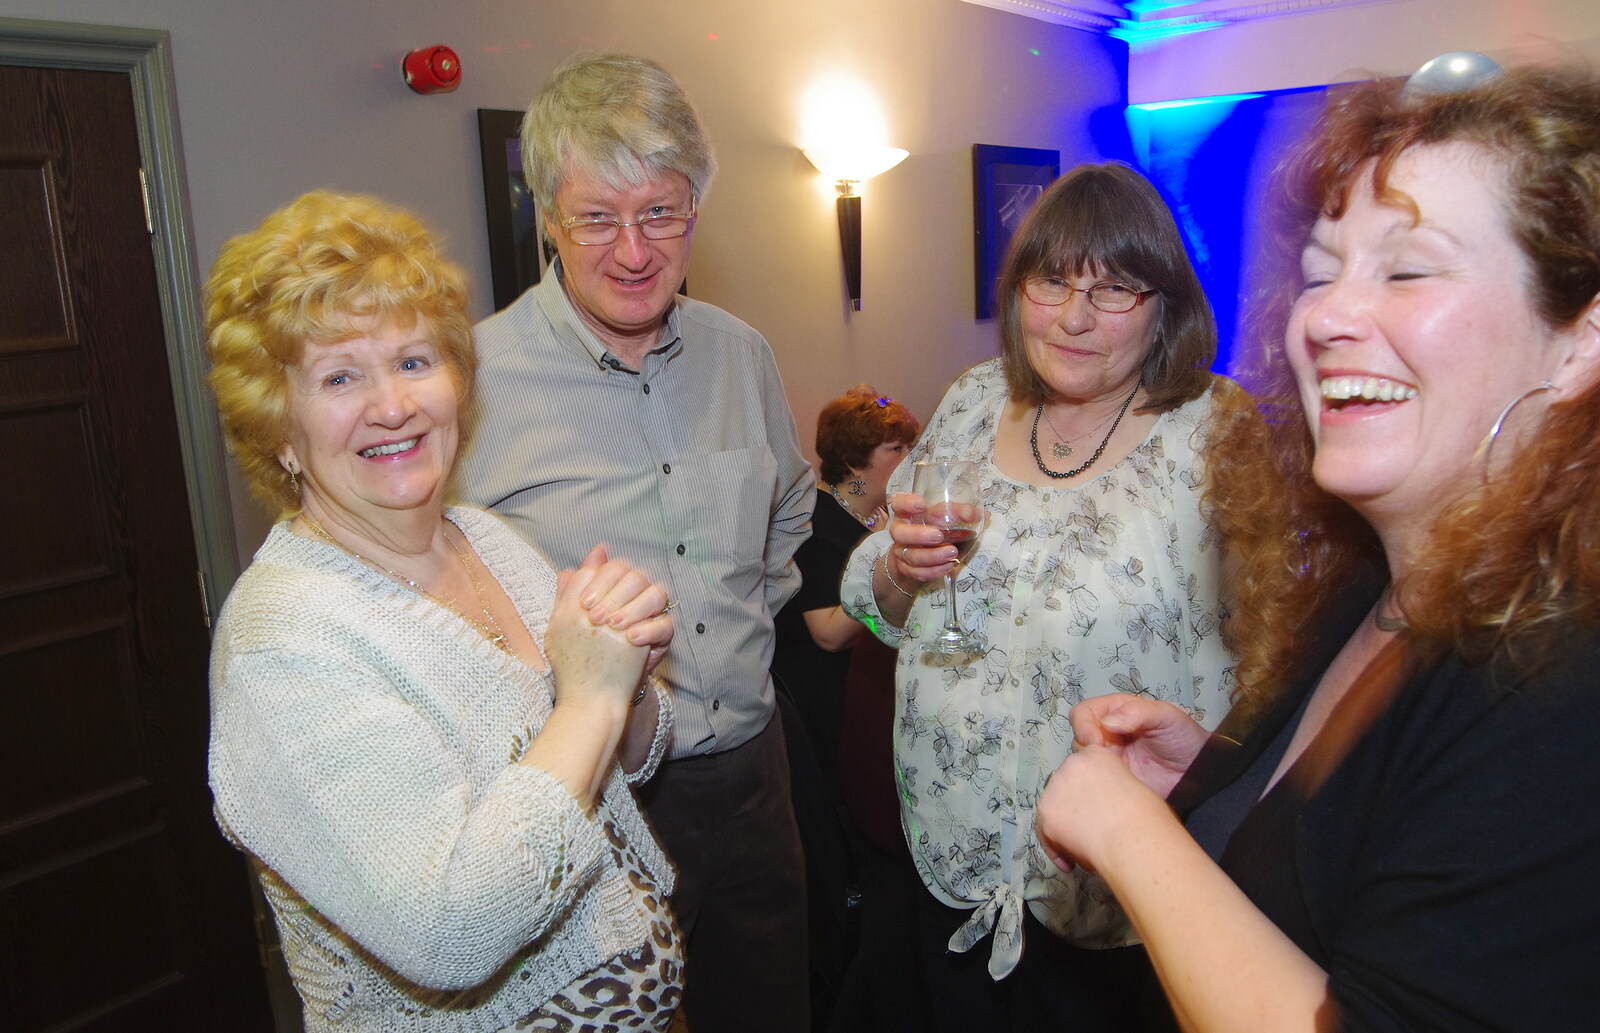 Josephine, Neil and Caroline from Uncle James's Ninetieth Birthday, Cheadle Hulme, Manchester - 20th April 2013